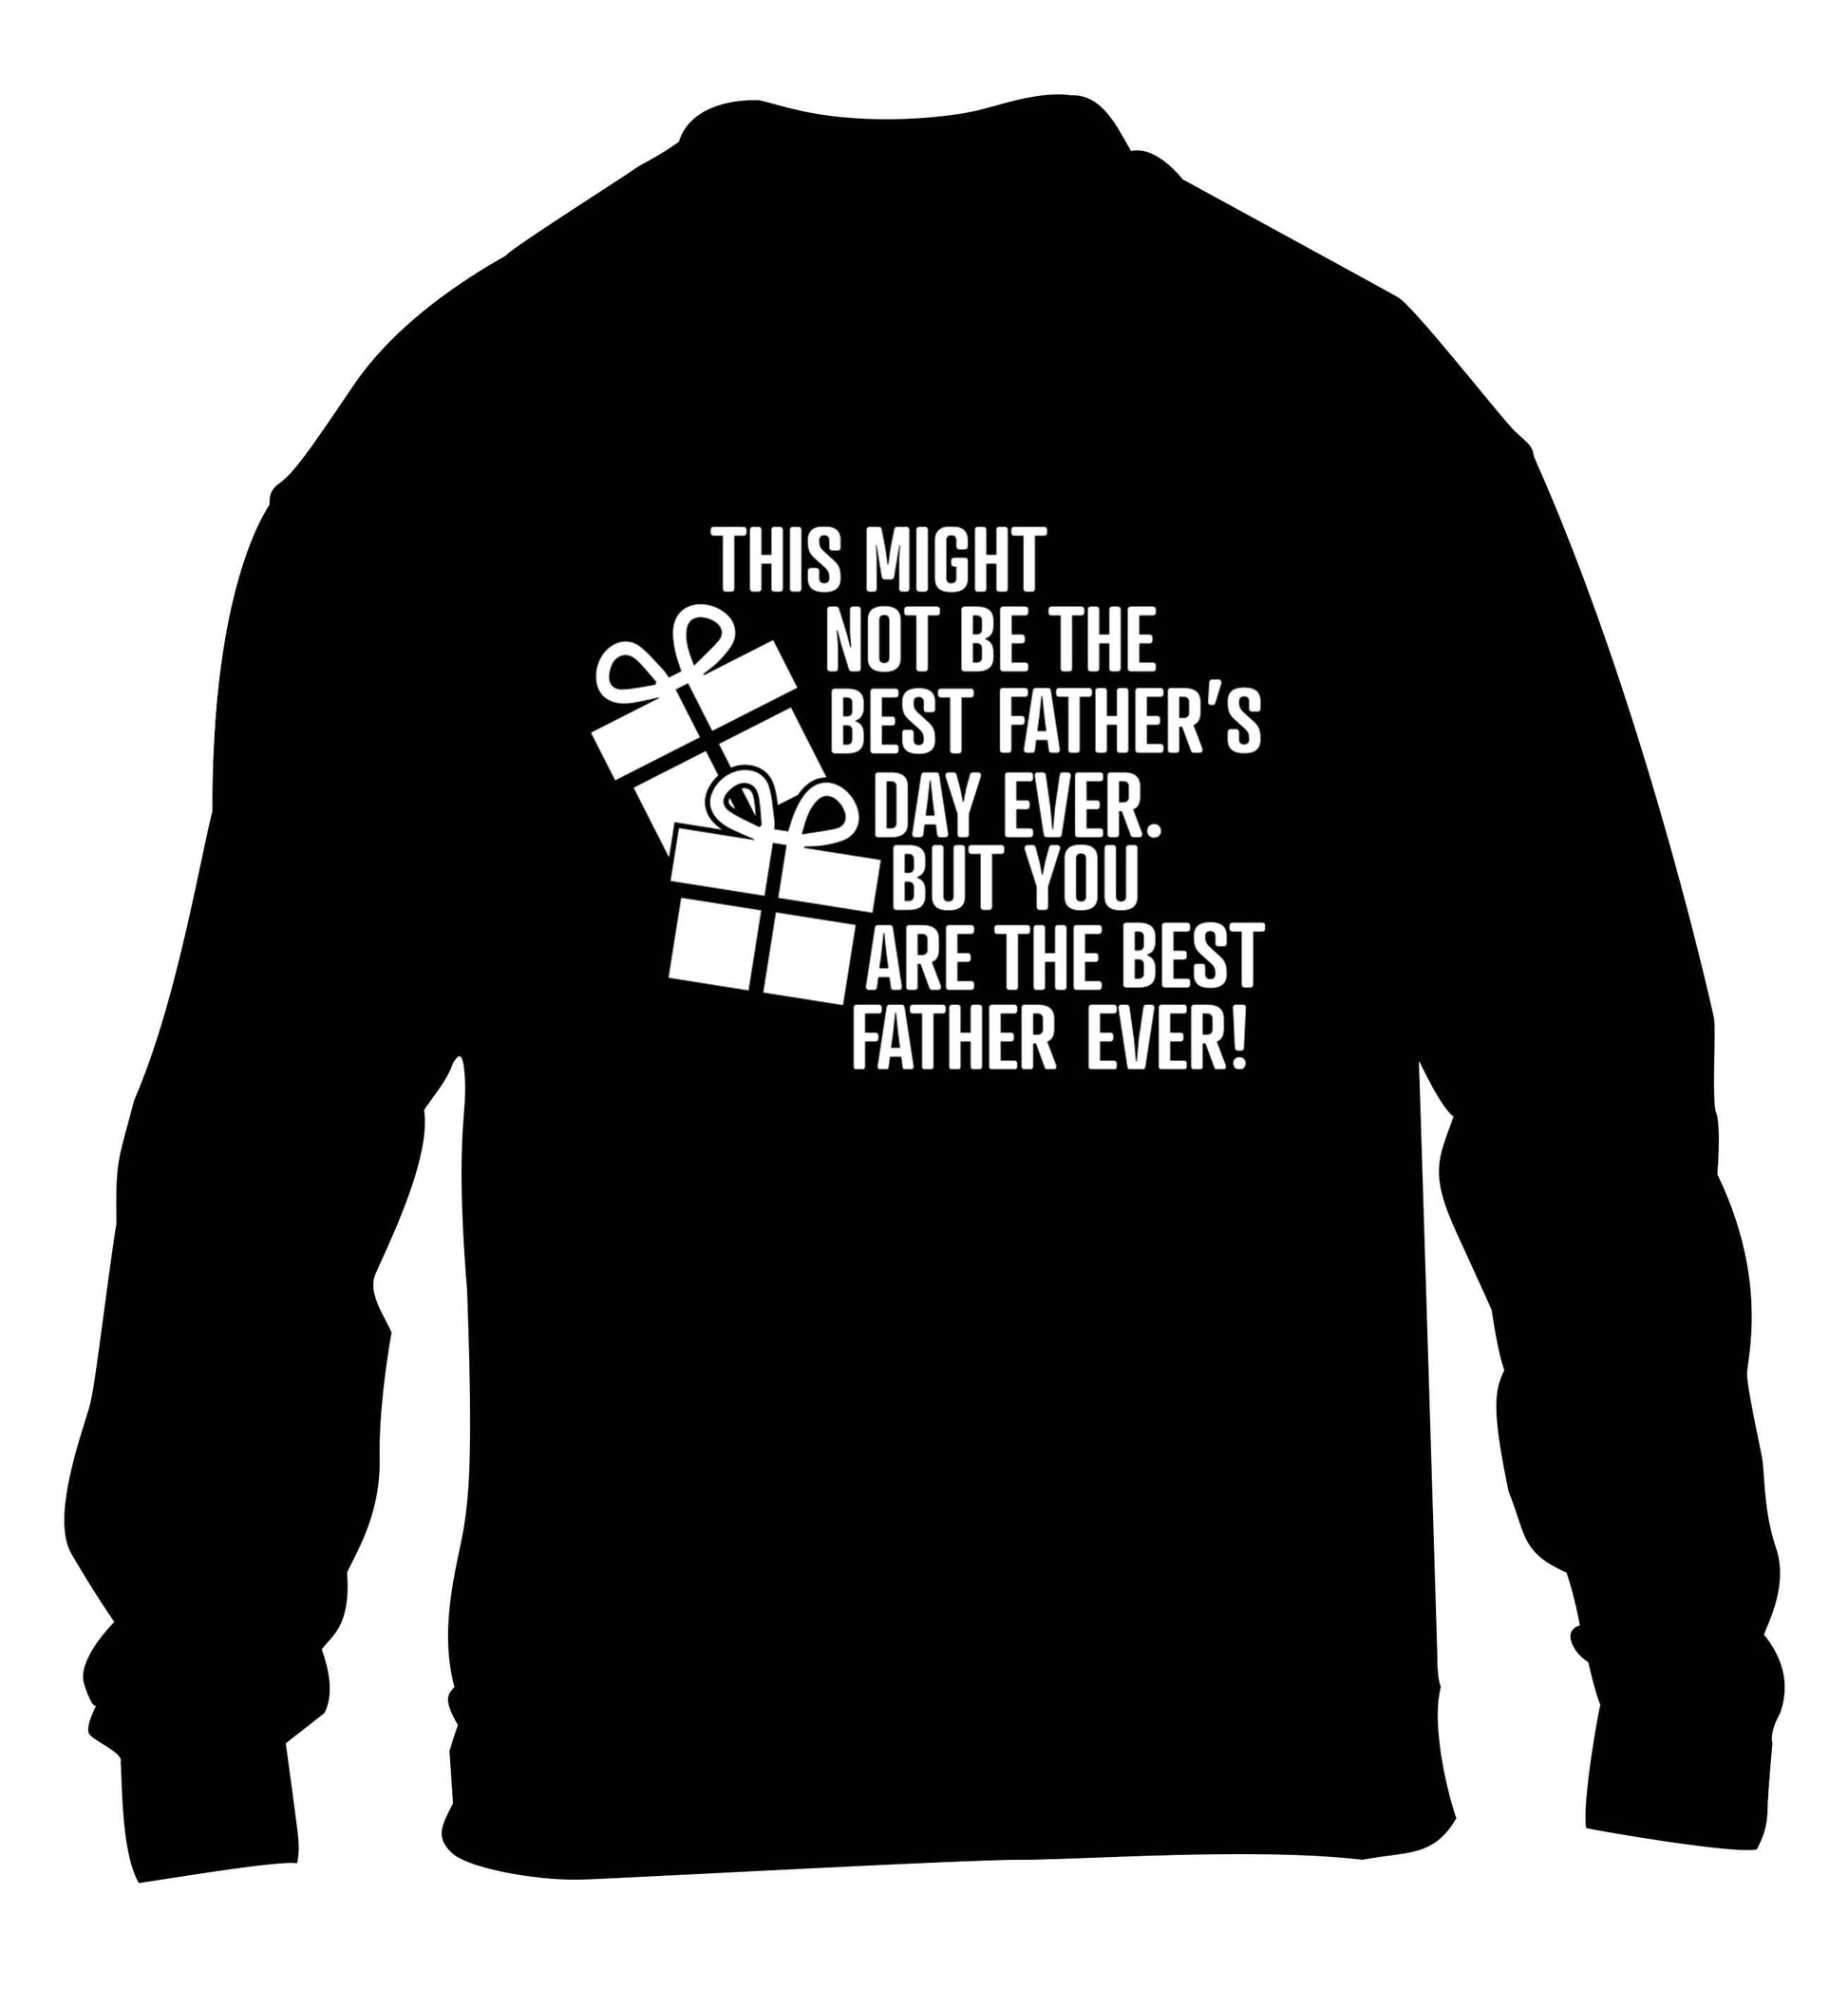 It might not be the best Father's Day ever but you are the best father ever! children's black sweater 12-13 Years